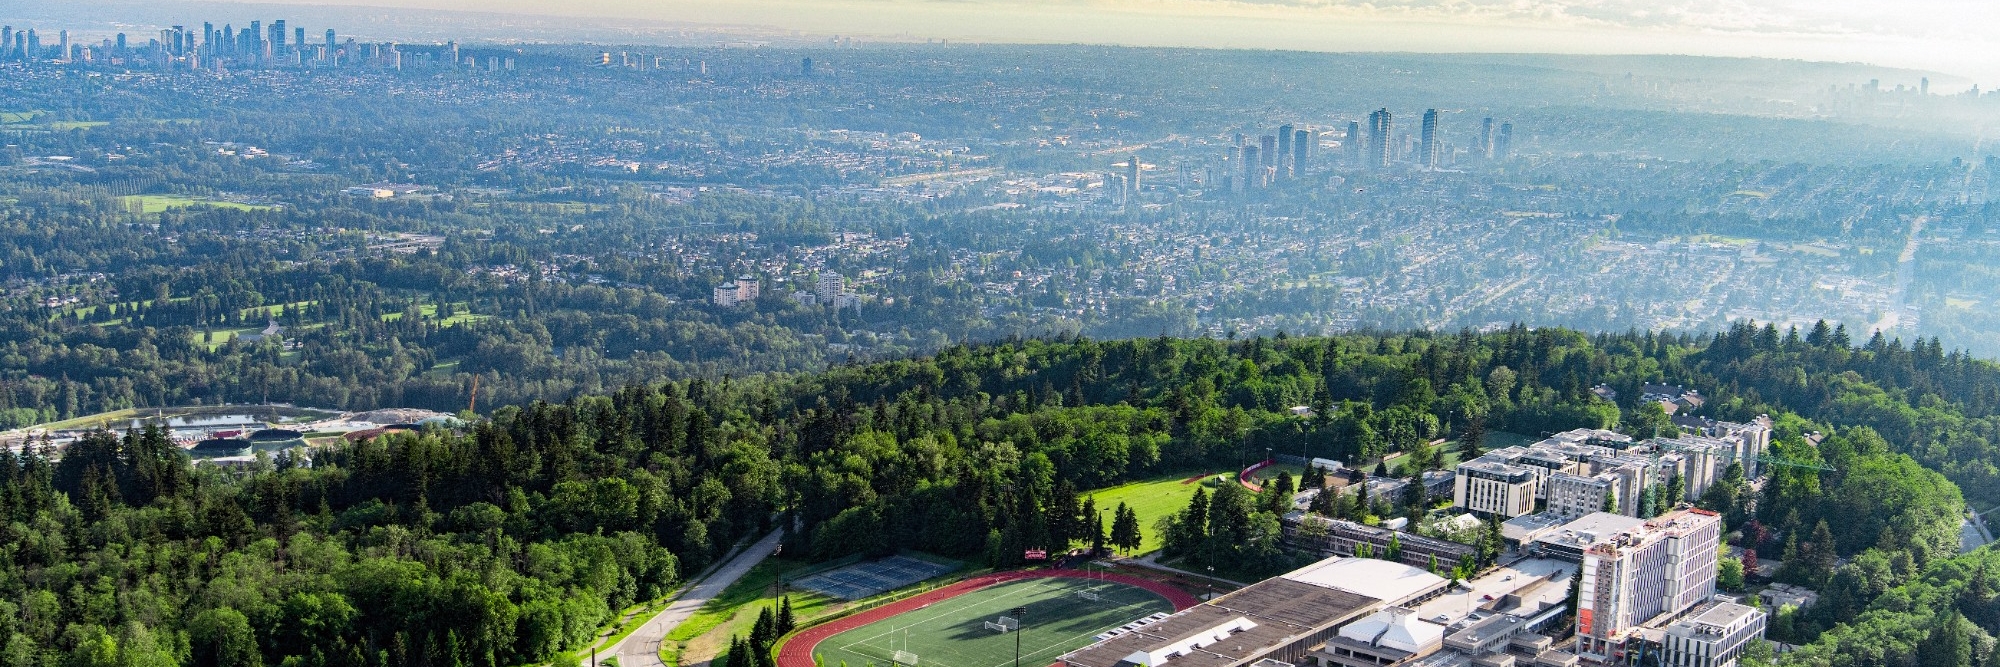 SFU aerial and view of lower mainland